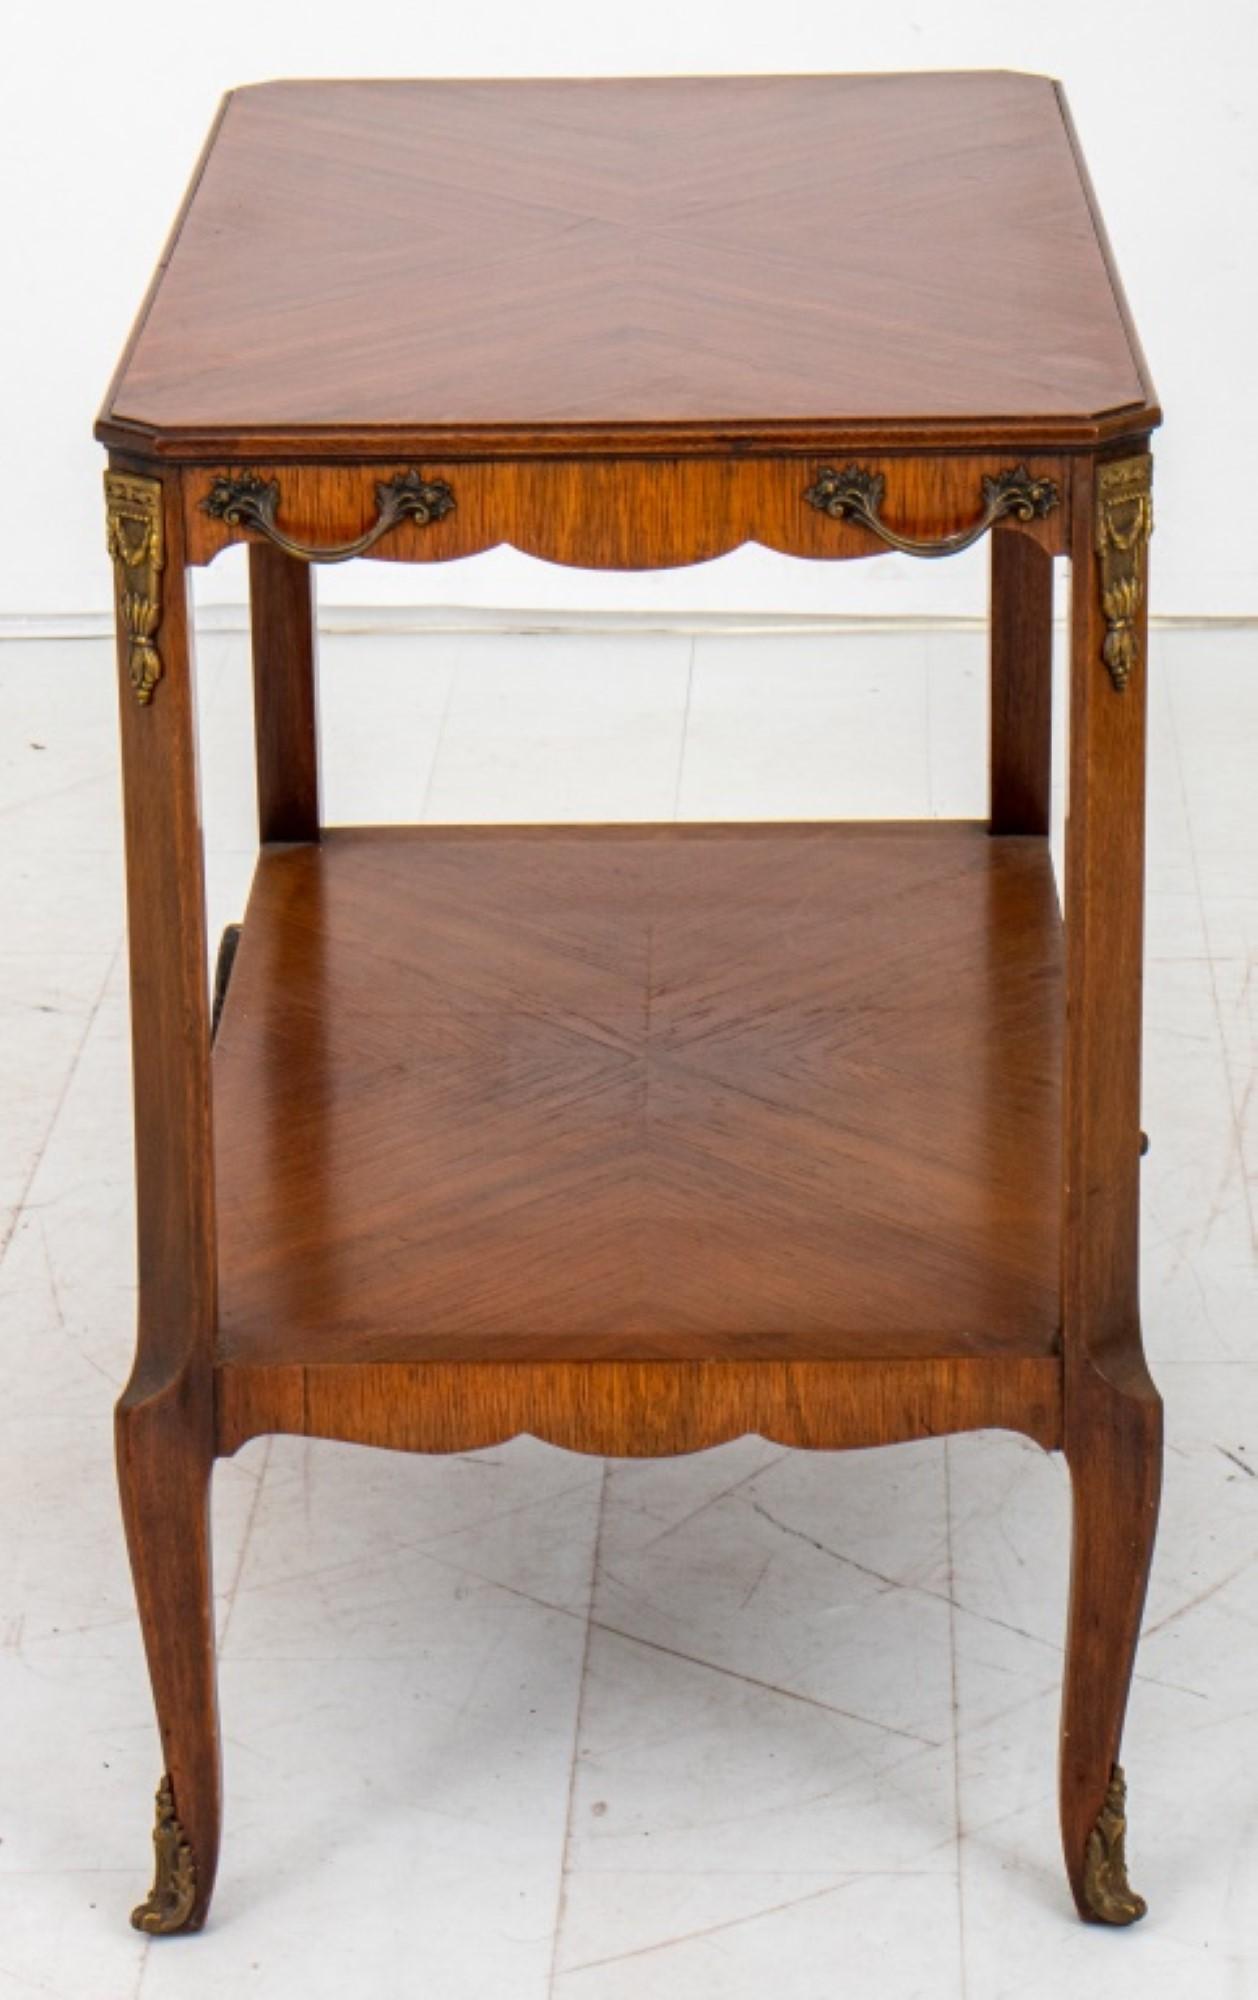 French transitional Louis XV / XVI style bar  cart in the manner of the Maison Jansen, the  bookmatched Macassar Ebony top above shaped  legs on wheels.

Dealer: S138XX